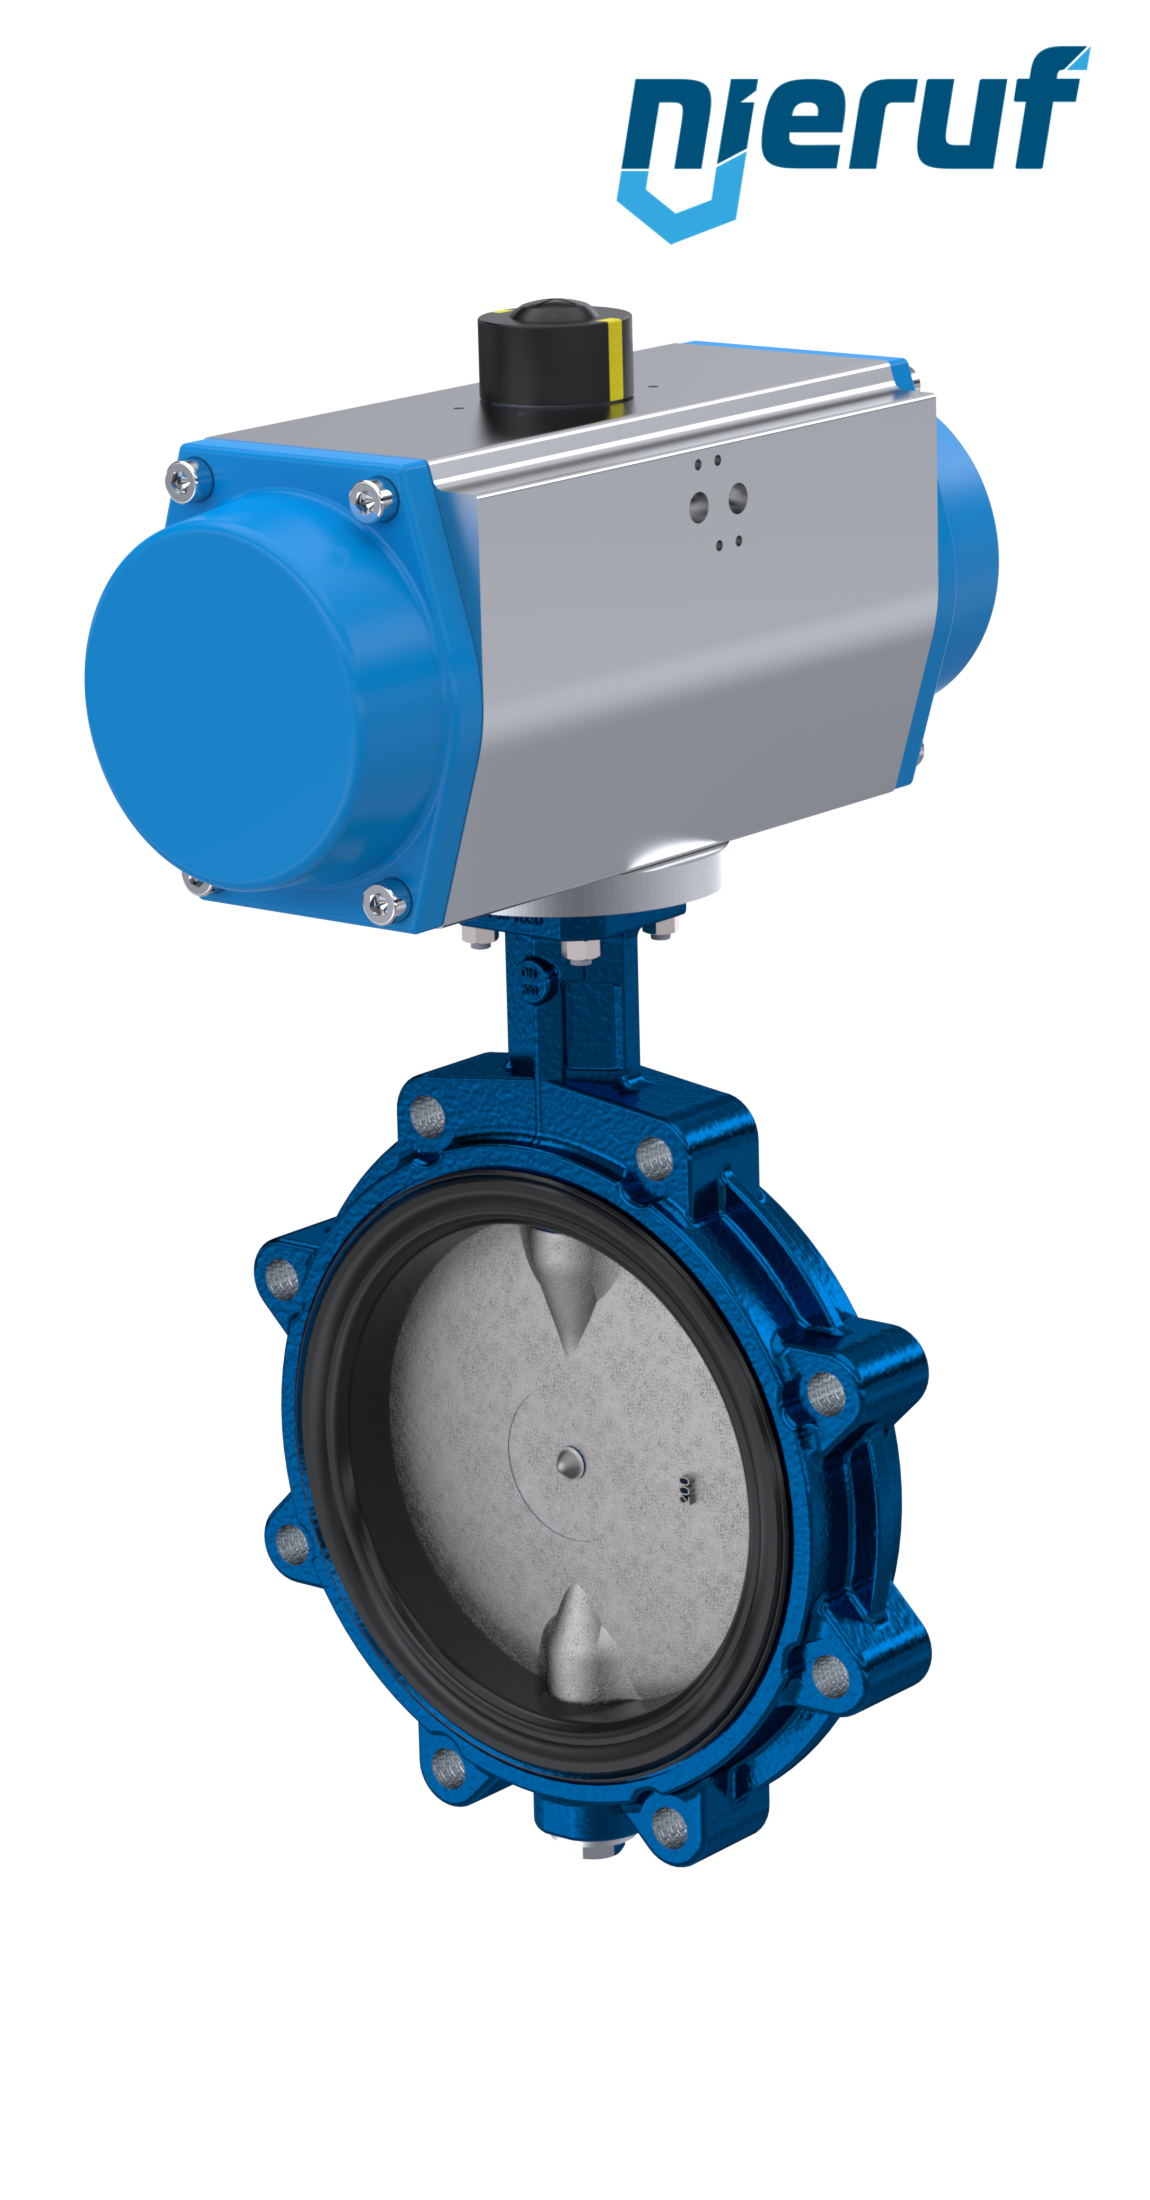 Butterfly valve DN 200 AK02 EPDM DVGW drinking water, WRAS, ACS, W270 pneumatic actuator single acting